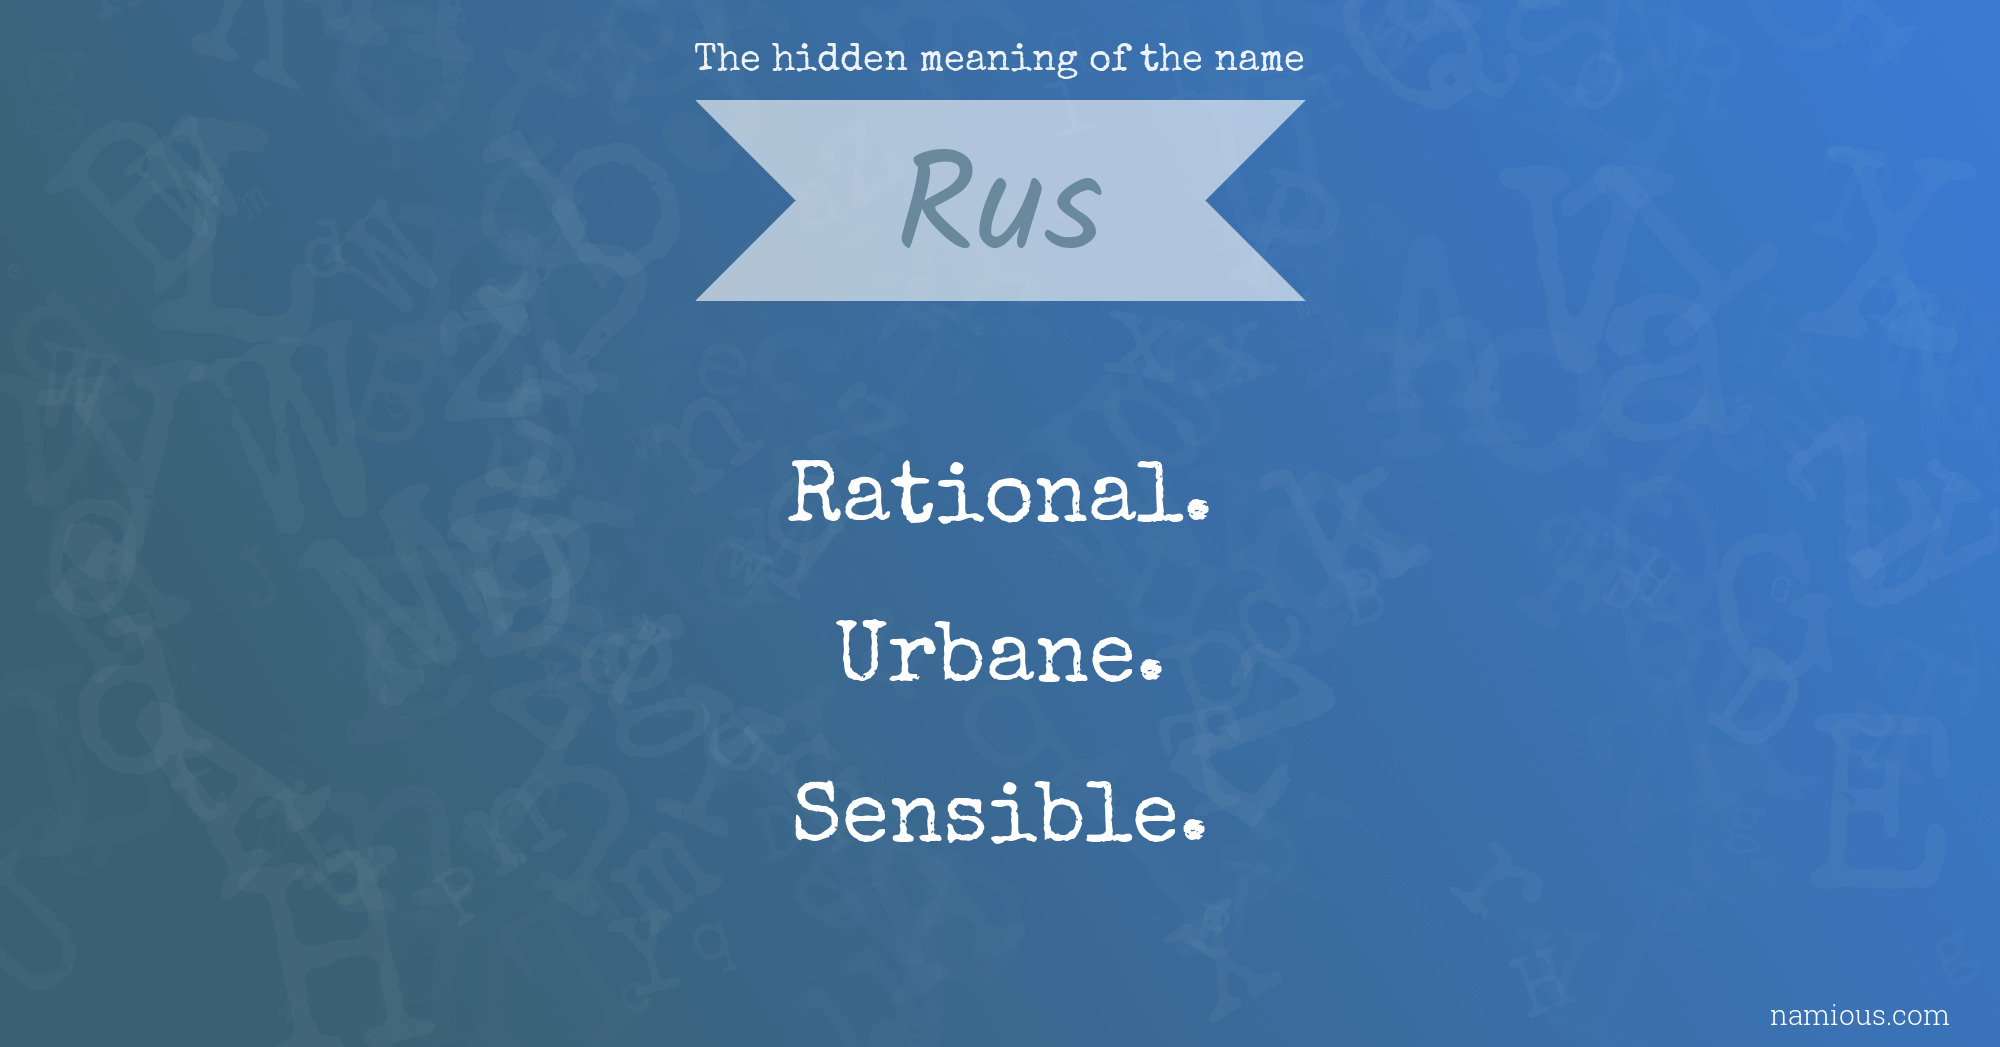 The hidden meaning of the name Rus